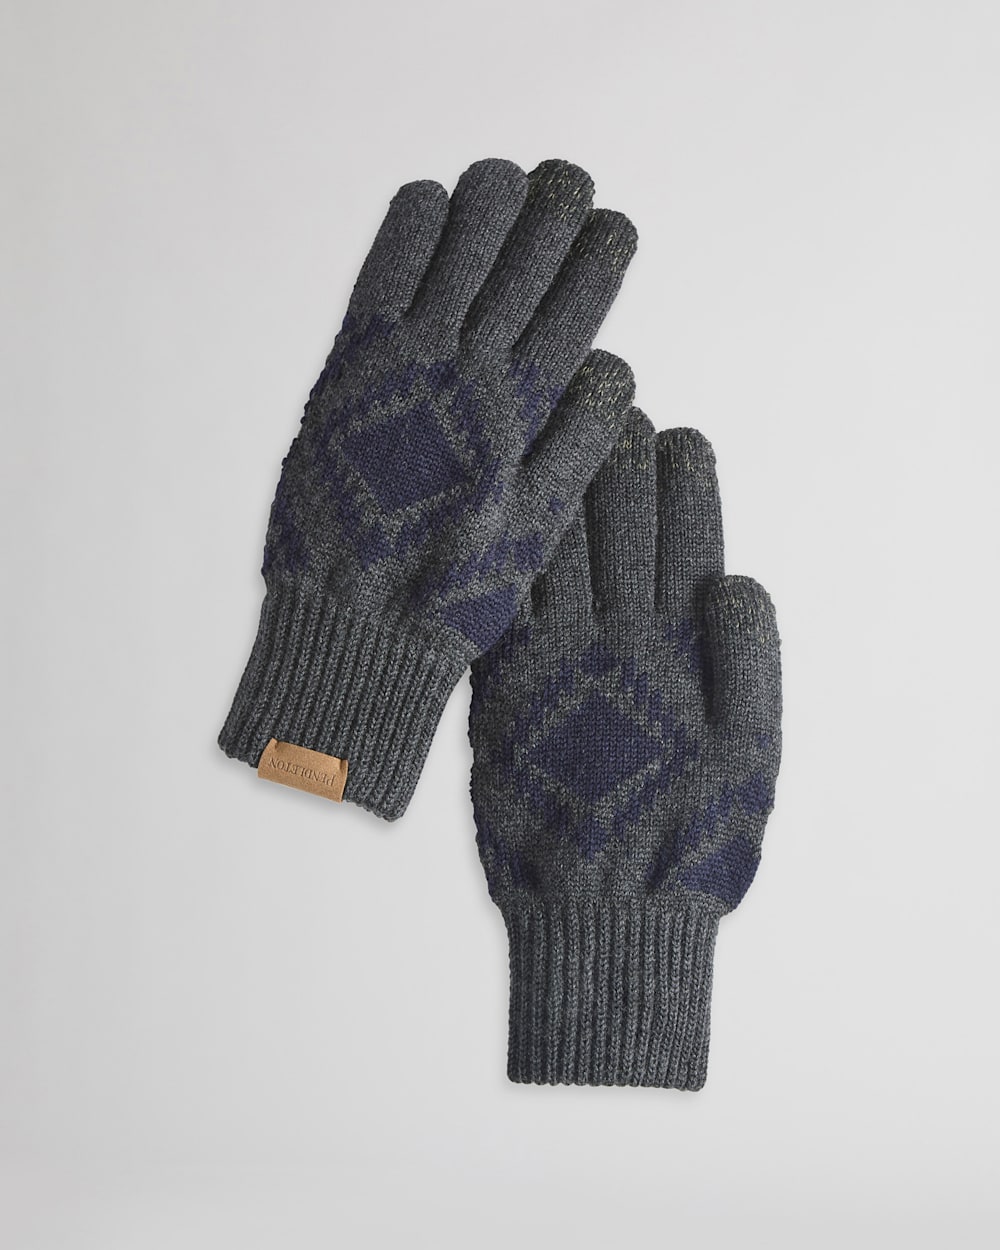 MERINO KNIT TEXTING GLOVES IN GREY SMITH ROCK image number 1